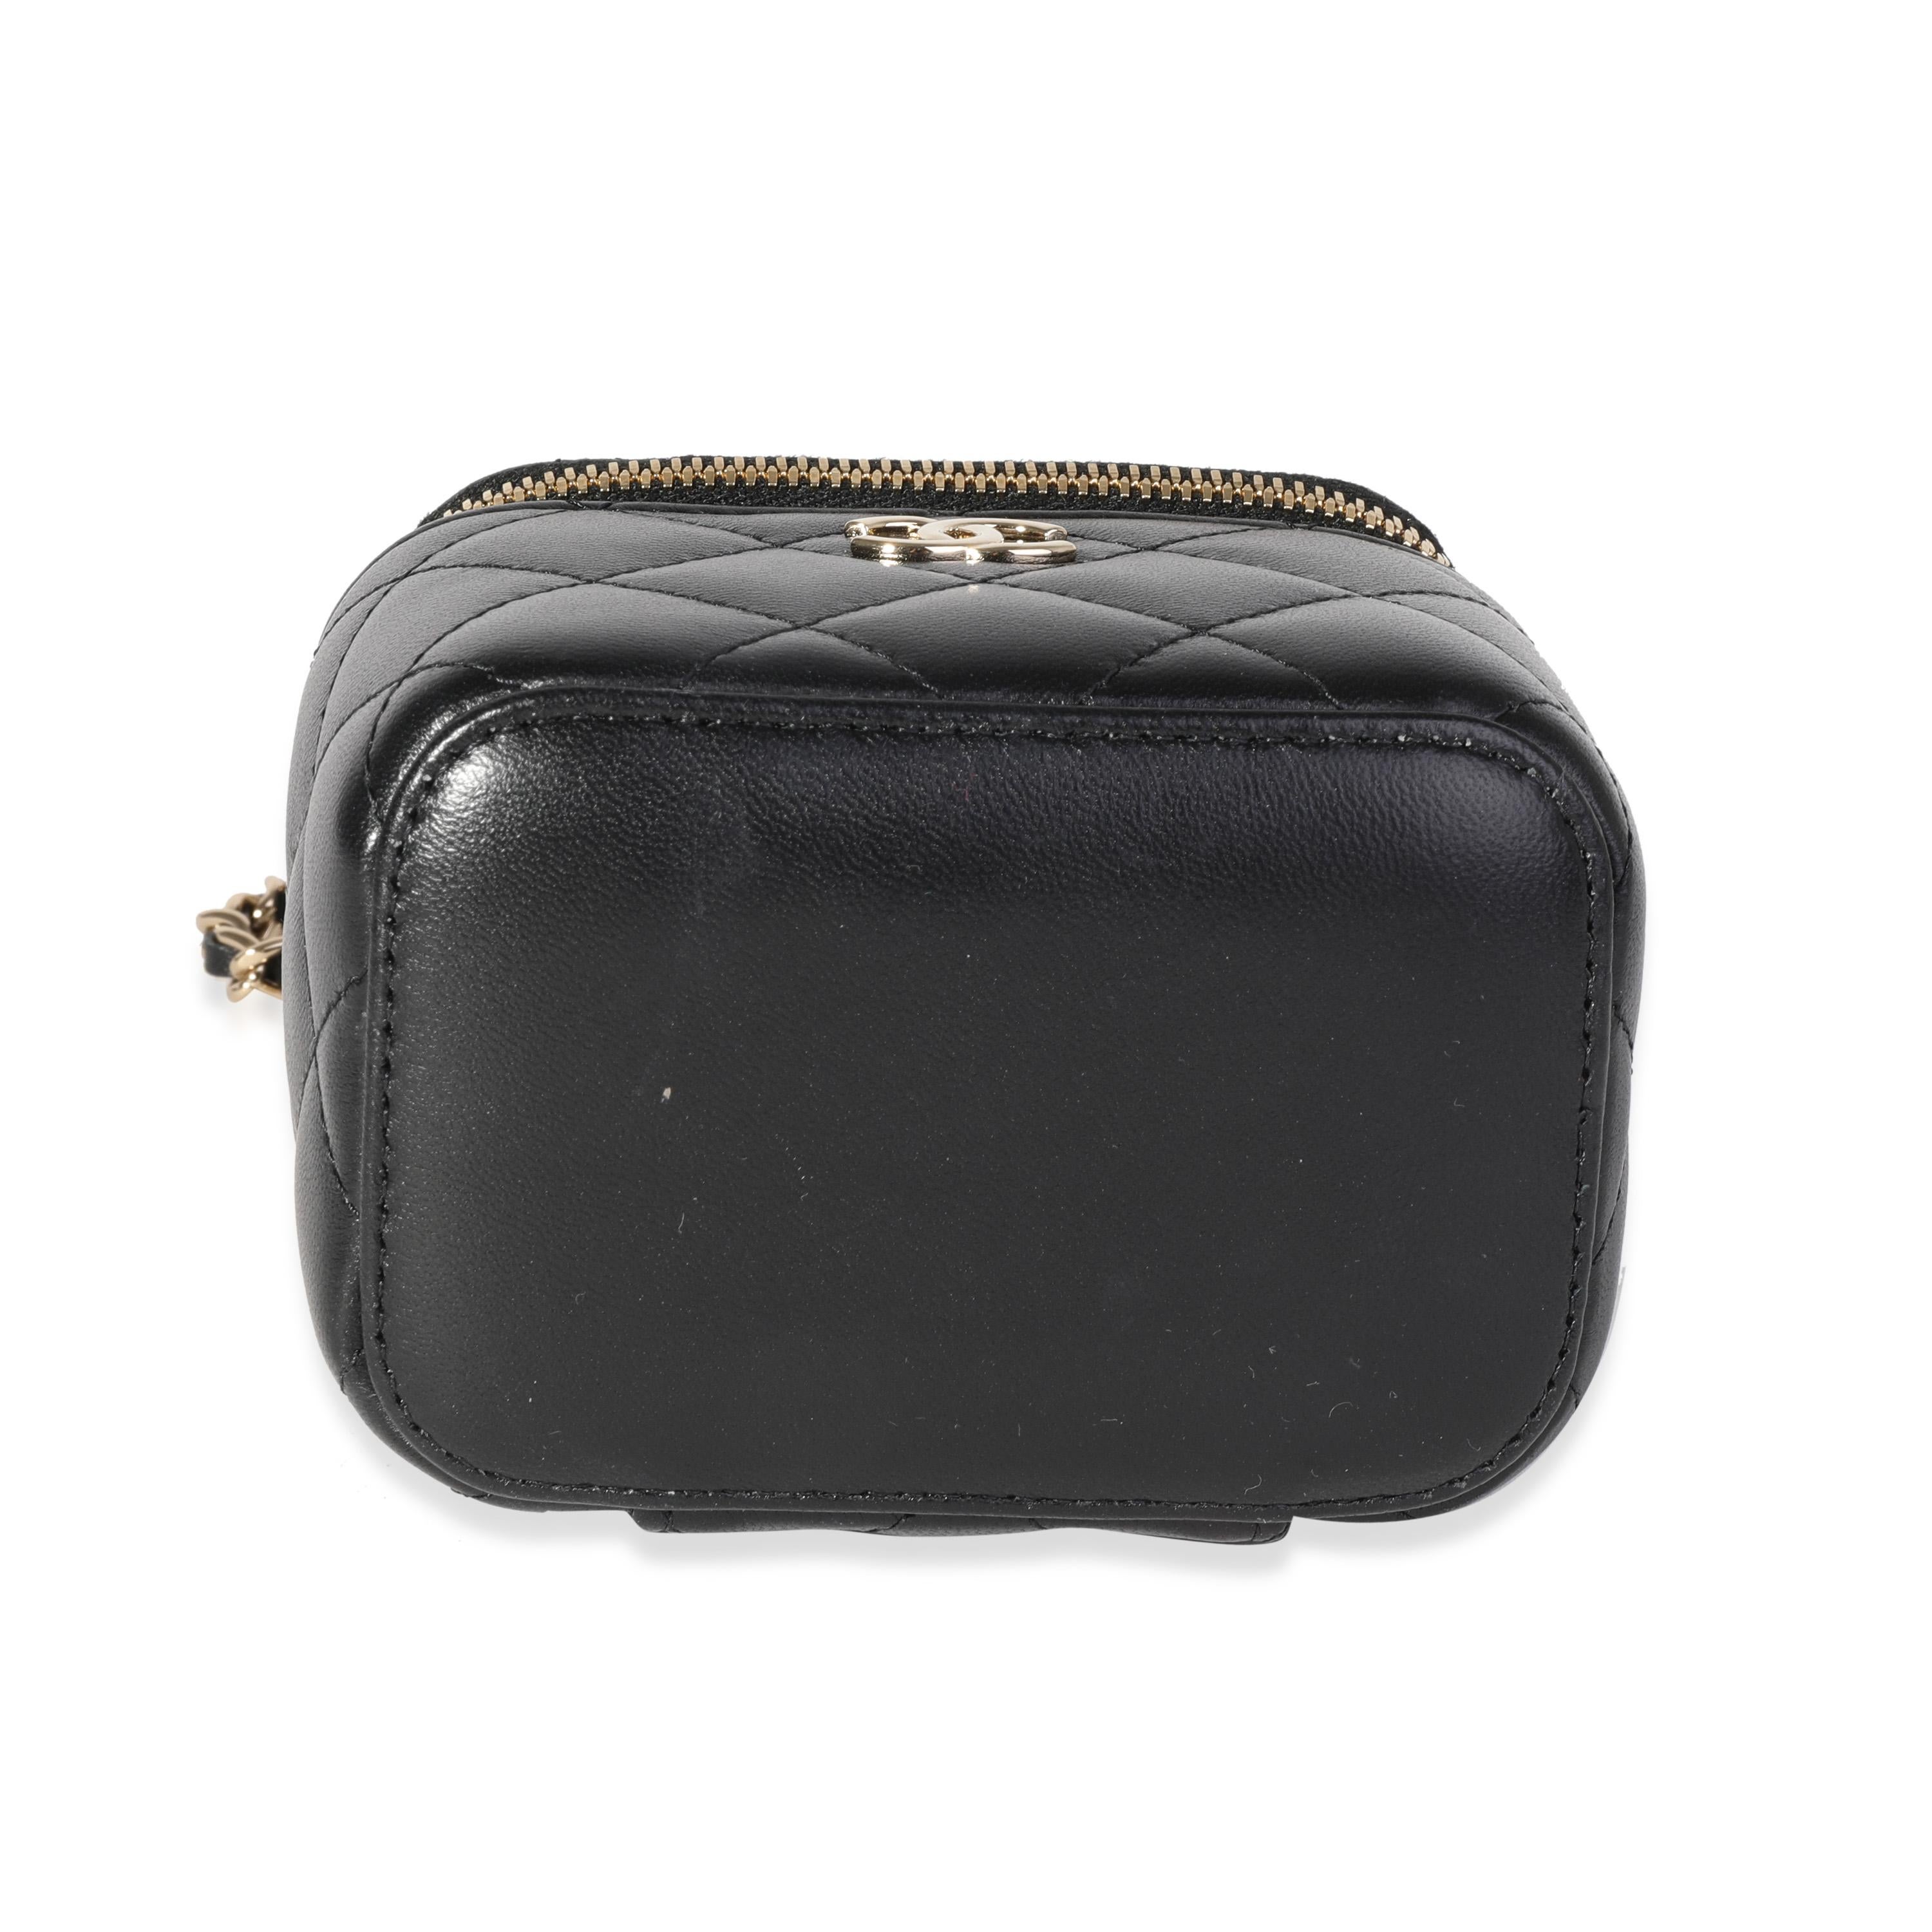 Women's Chanel Black Quilted Lambskin Mini Vanity Case with Chain